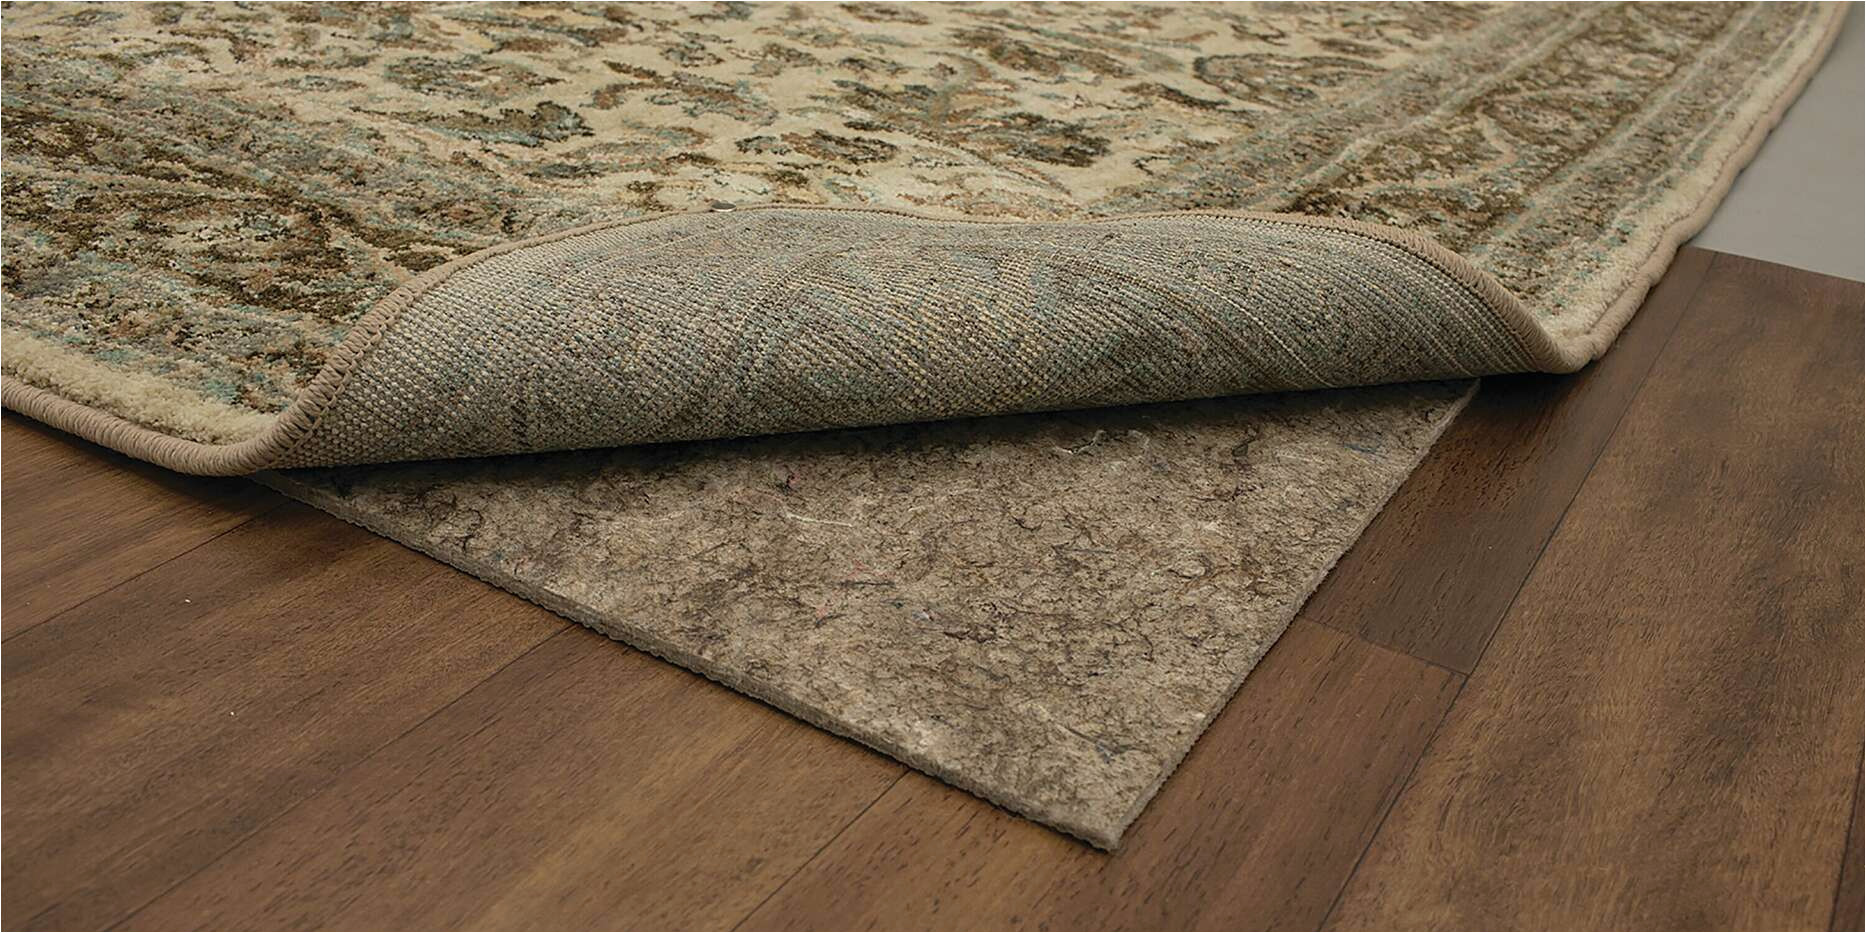 Area Rug Pads Necessary for Hardwood Floors Best Rug Pads for Any Carpet or Floor Martha Stewart